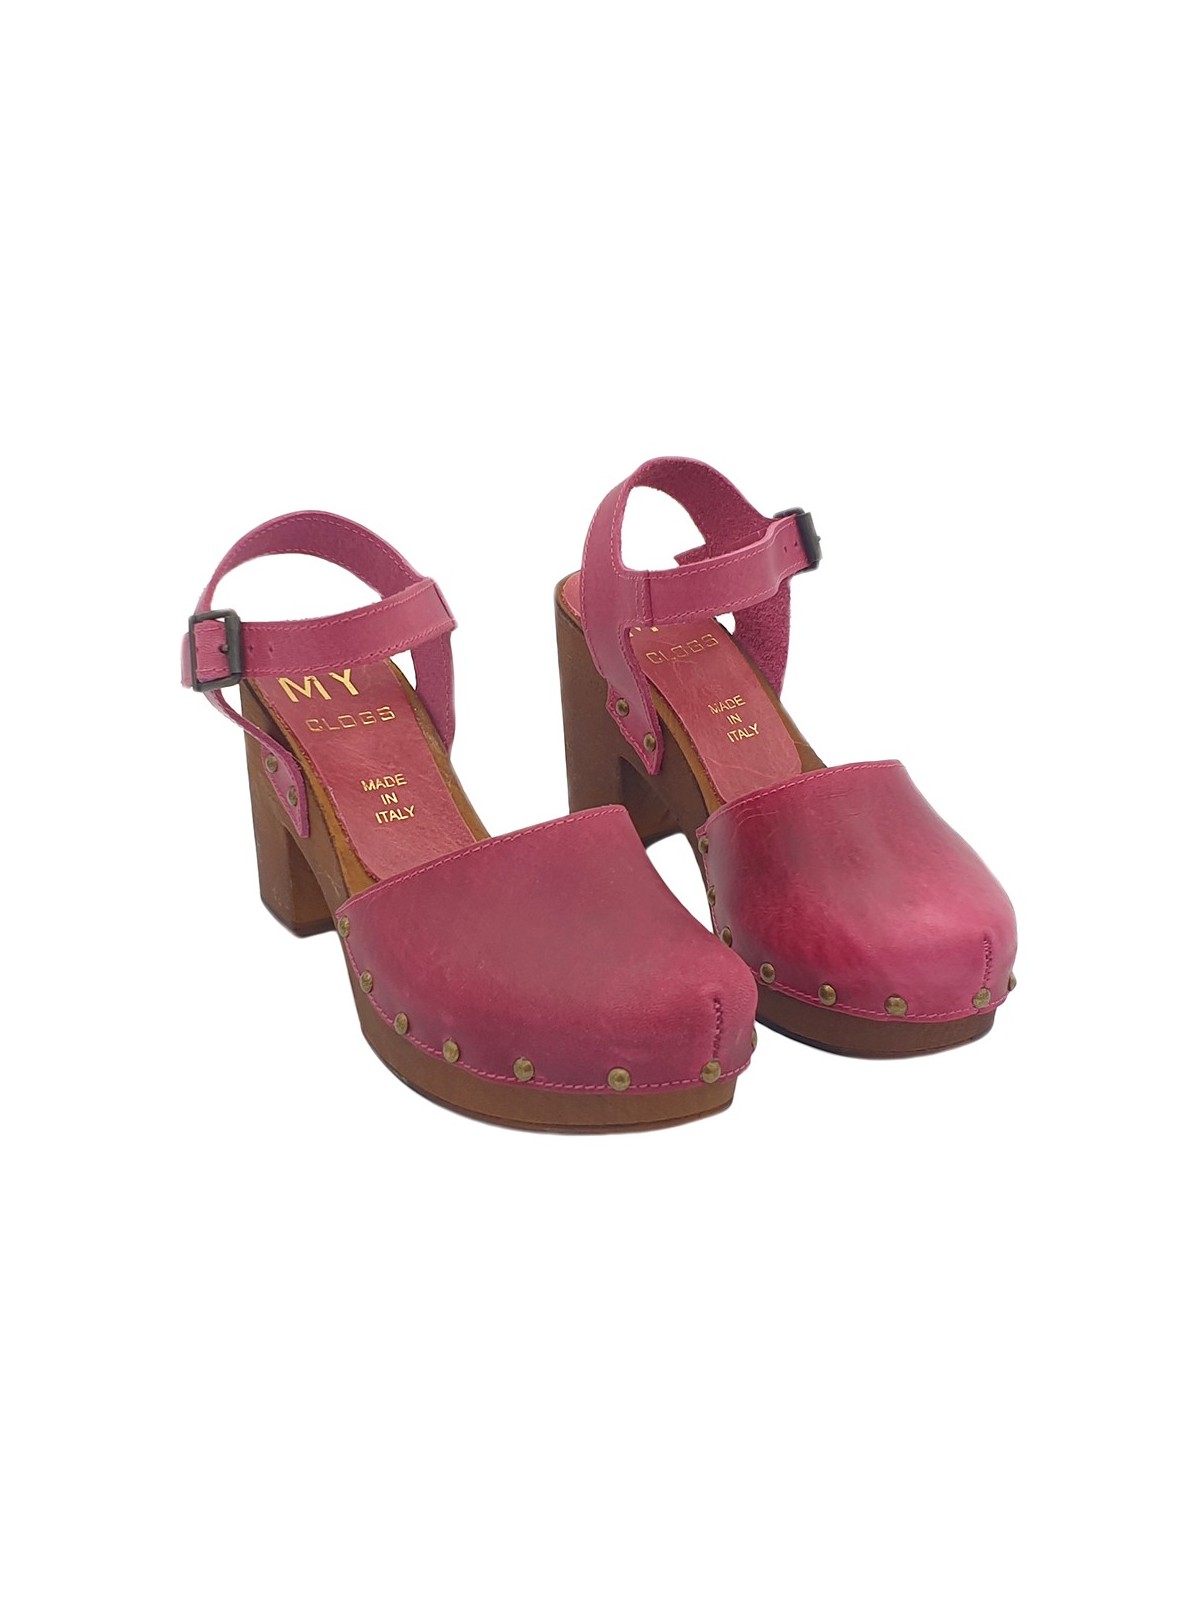 CLOGS FUCSIA WITH ANKLE STRAP HEEL 9